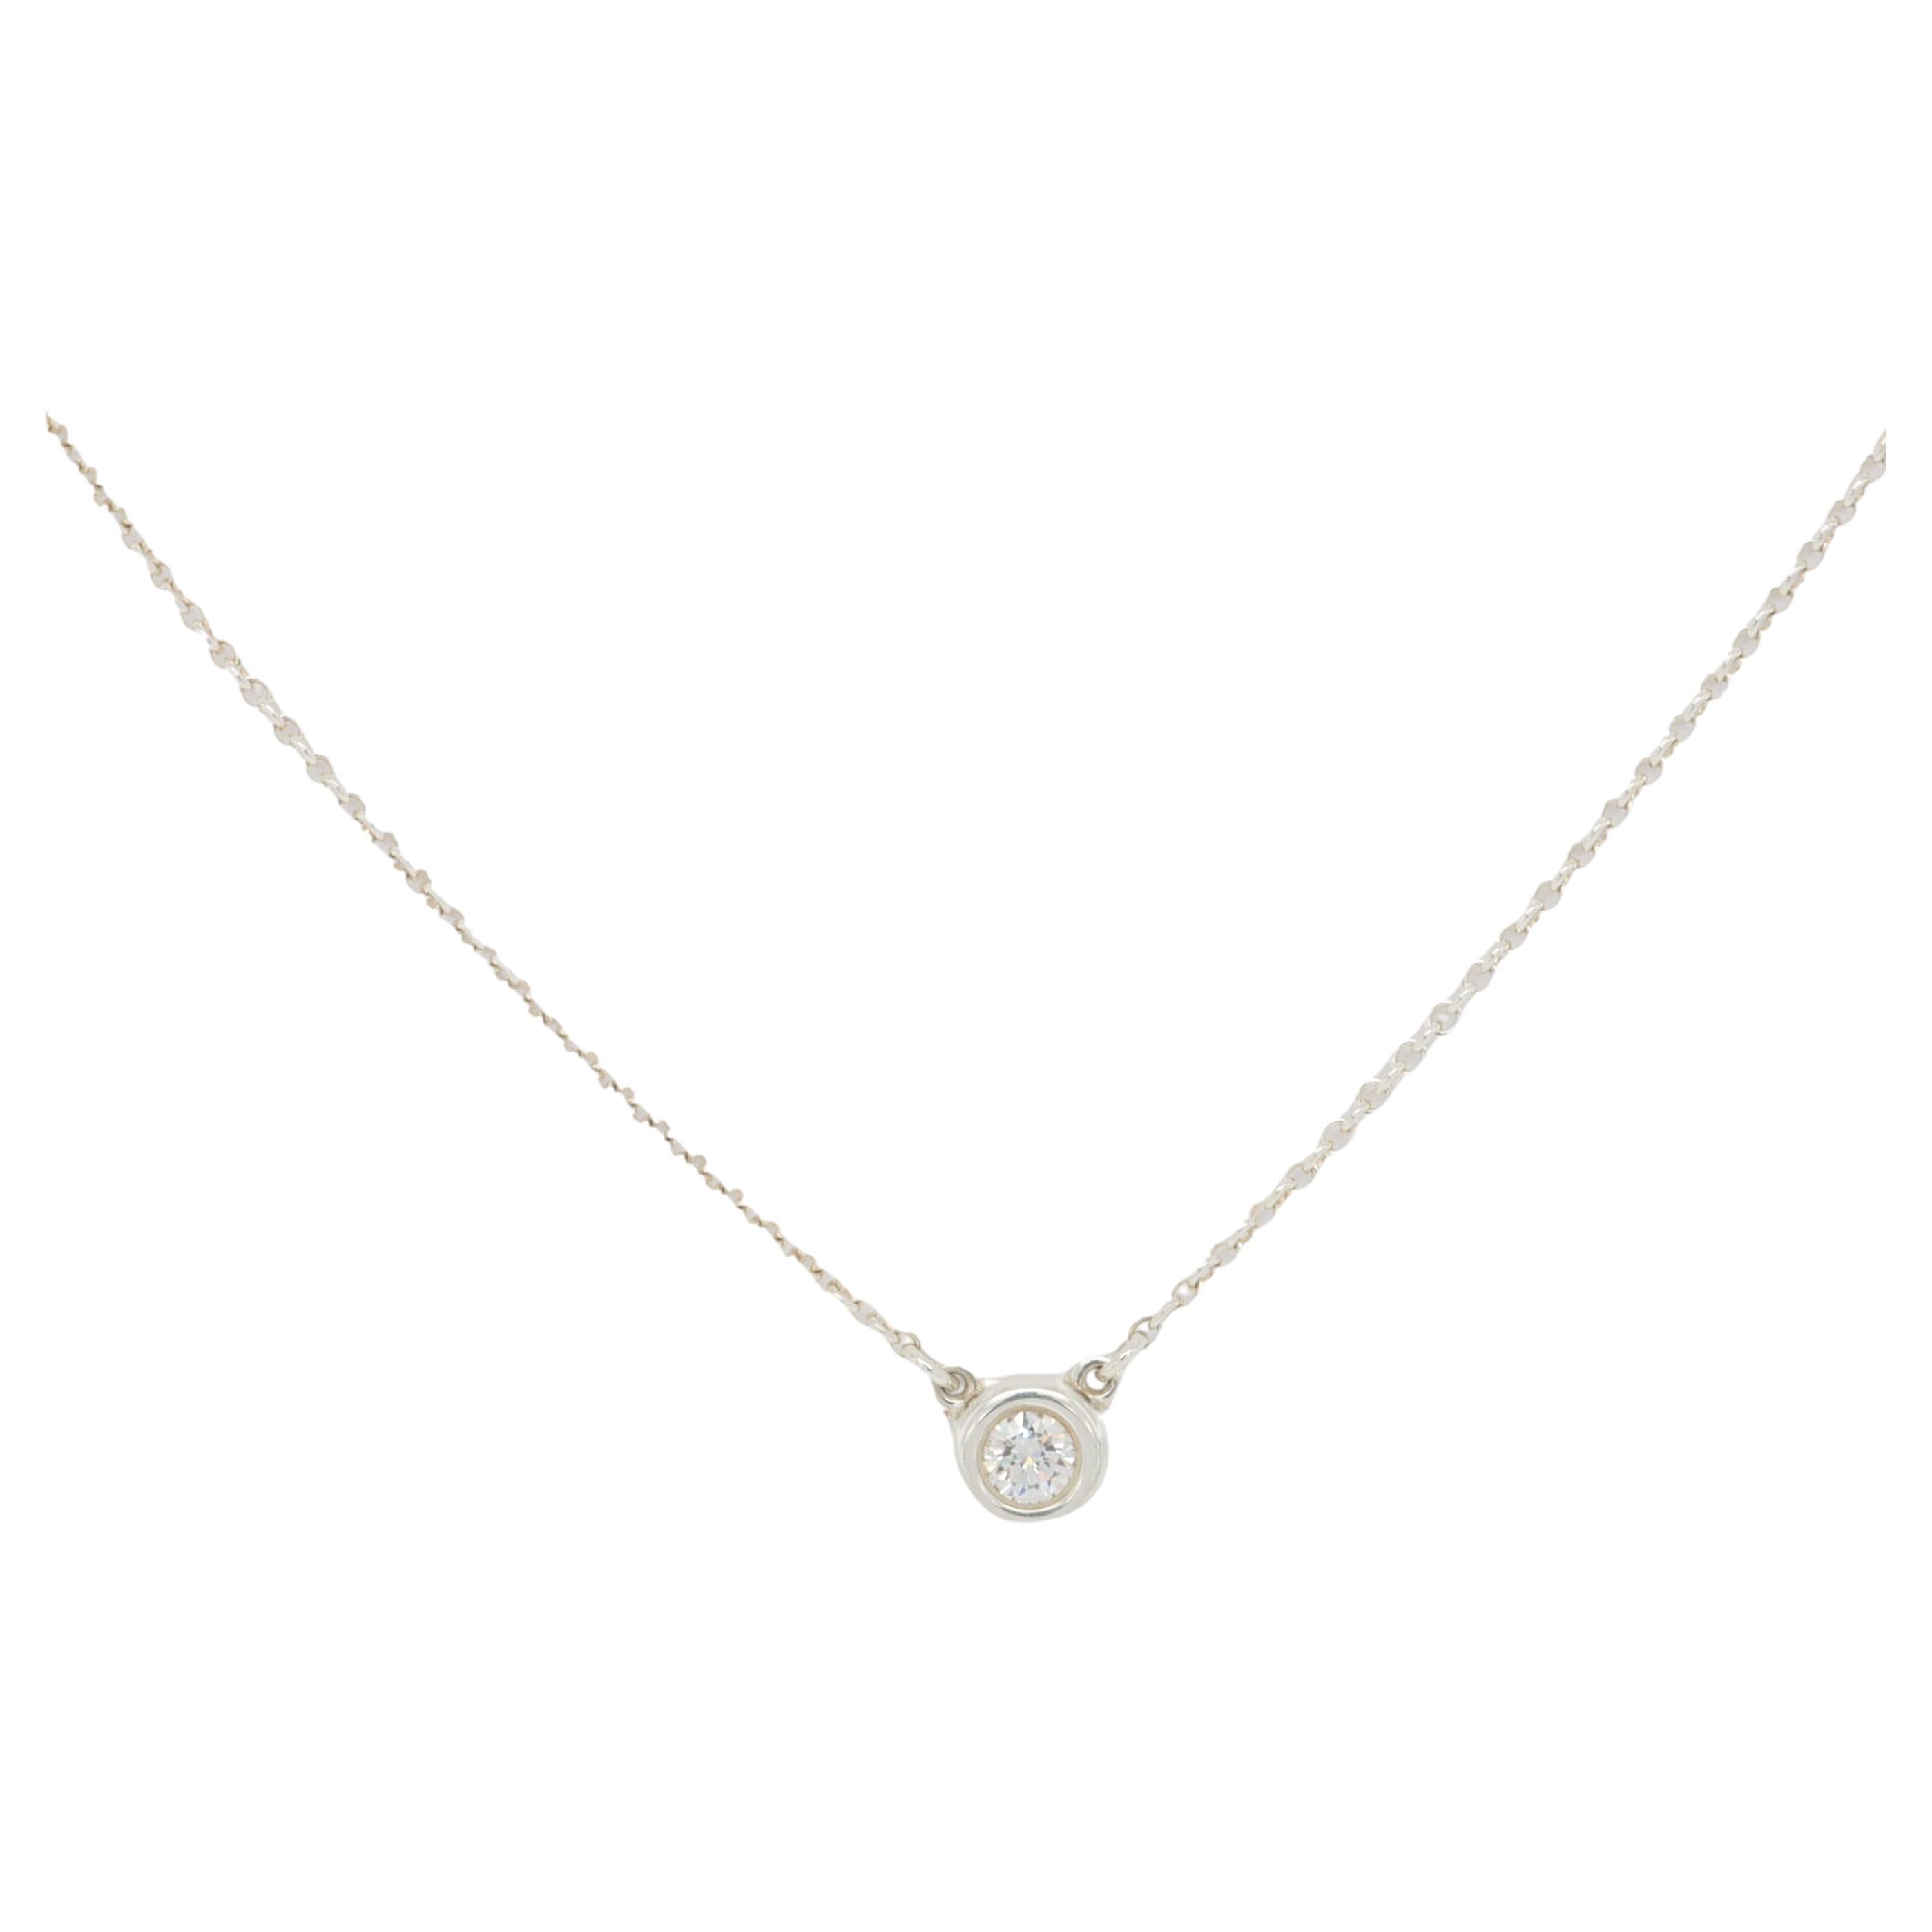 Tiffany & Co. diamonds by the yard pendant necklace designed by Elsa Peretti finely crafted in sterling silver featuring a bezel set round brilliant cut diamond weighing 0.10 cts. G Color VS clarity hanging off a 16